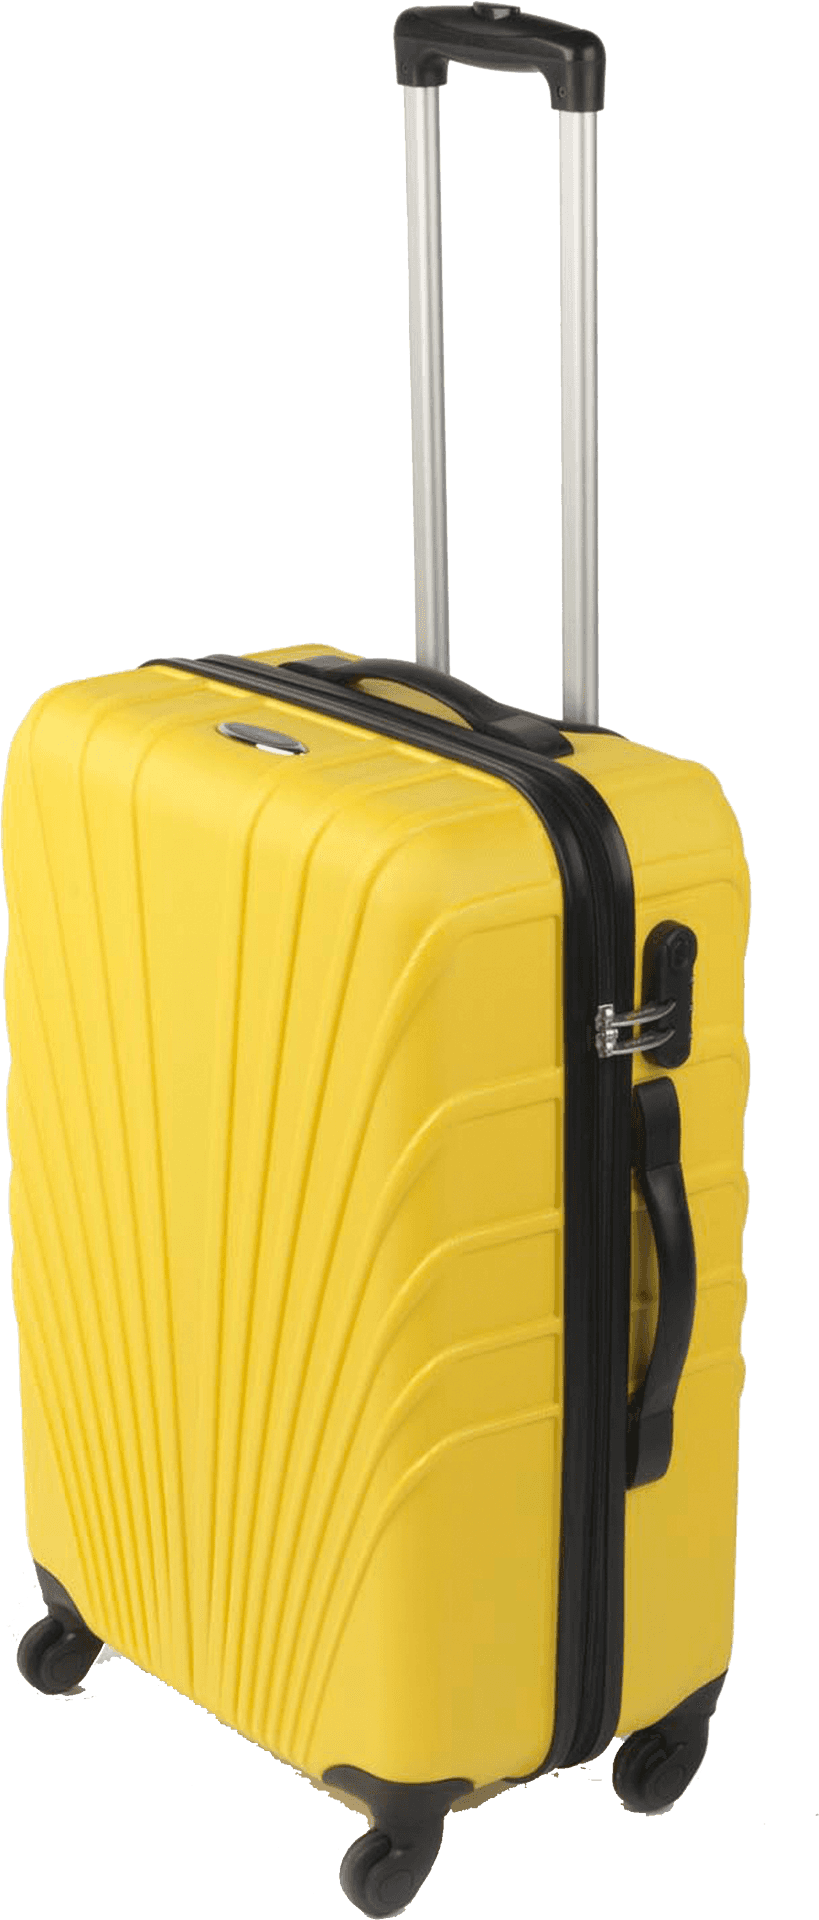 Yellow Hardshell Suitcase Standing PNG